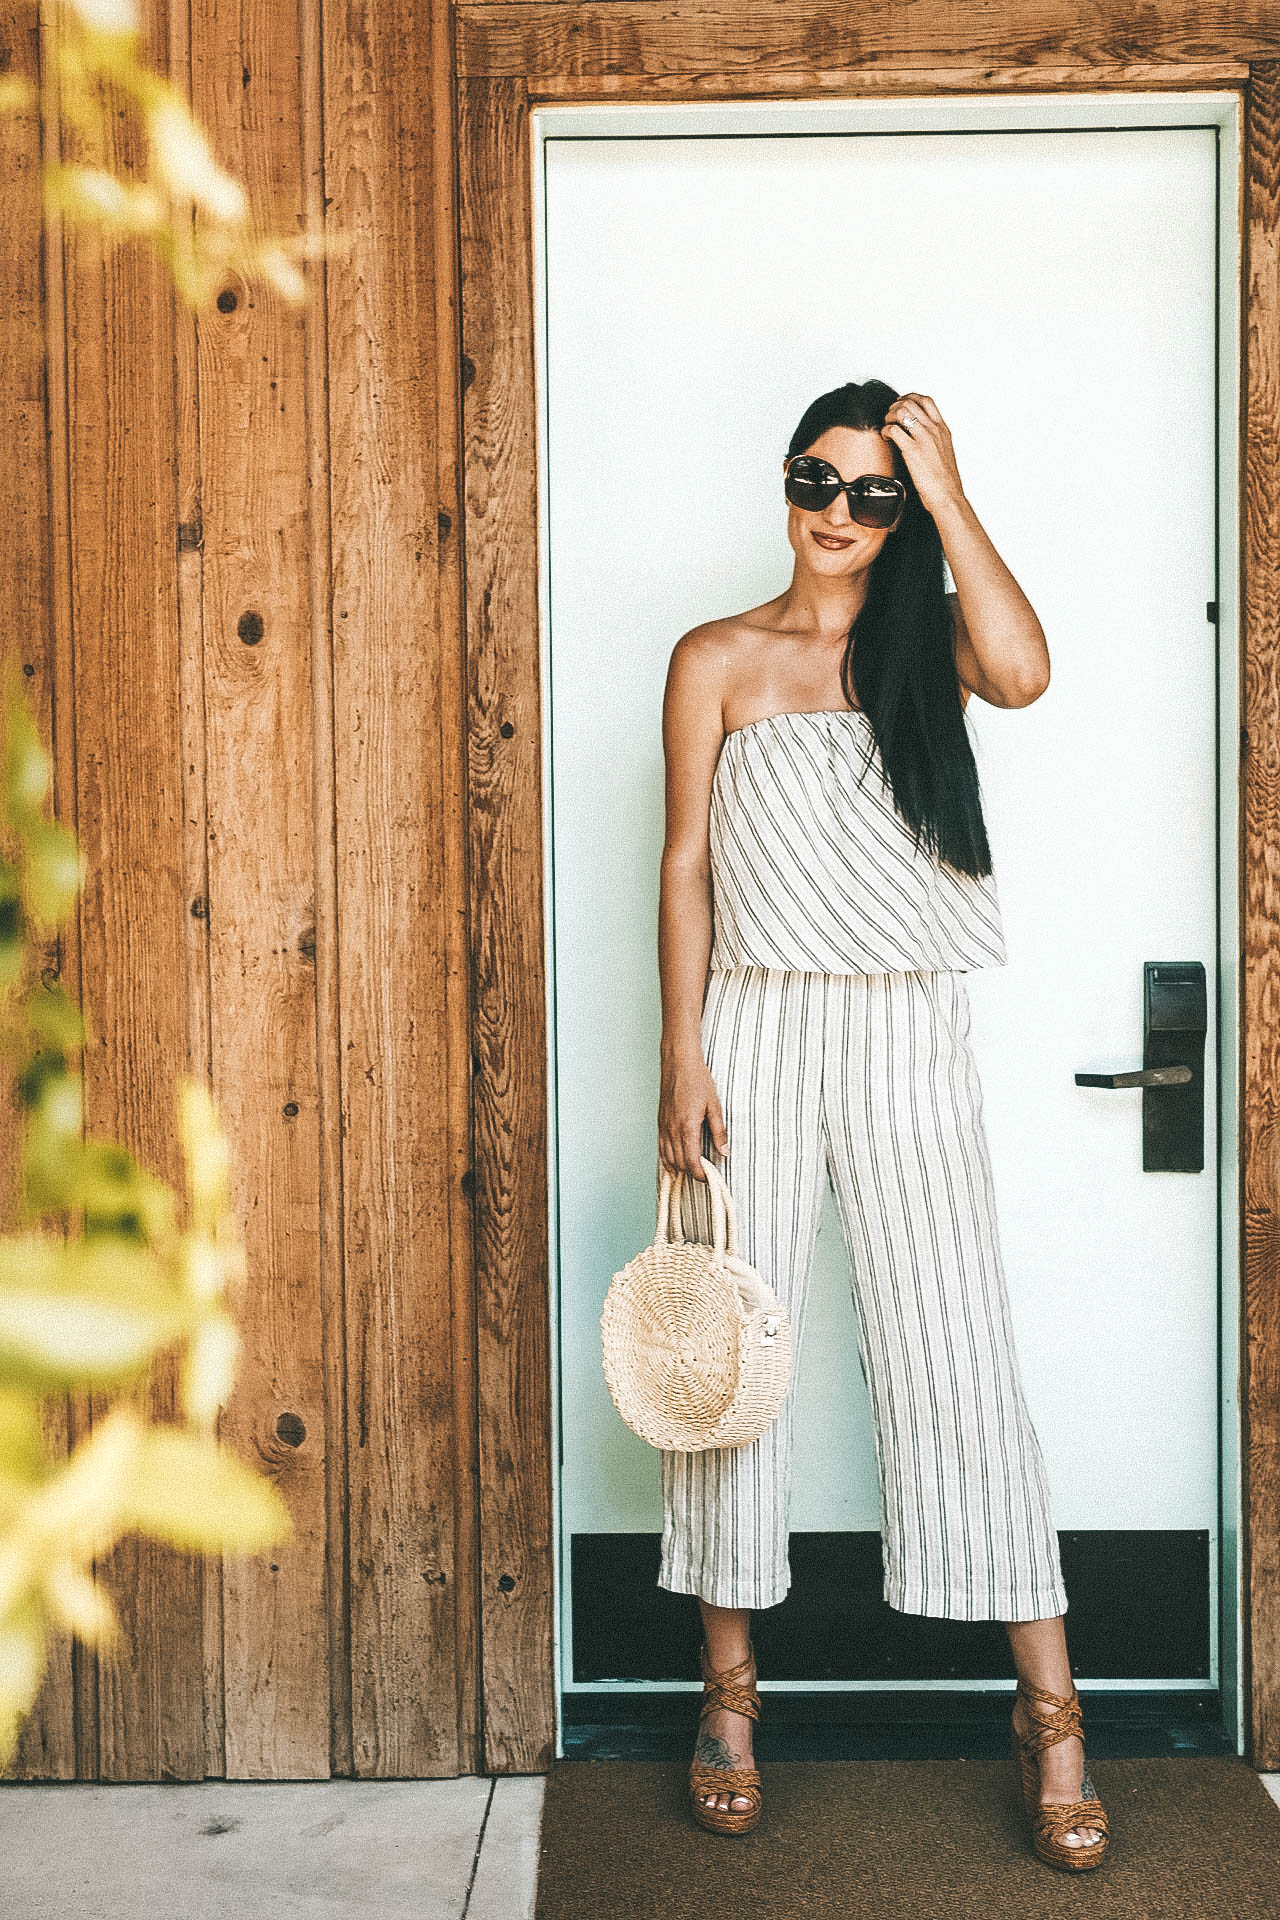 DTKAustin shares her favorite women's clothing from the new Joie at the Domain NORTHSIDE in Austin. Get an exclusive 20% off in Austin with code JOIENORTHSIDE. - Joie at Domain NORTHSIDE in Austin + Exclusive Discount} featured by popular Austin fashion blogger, Dressed to Kill